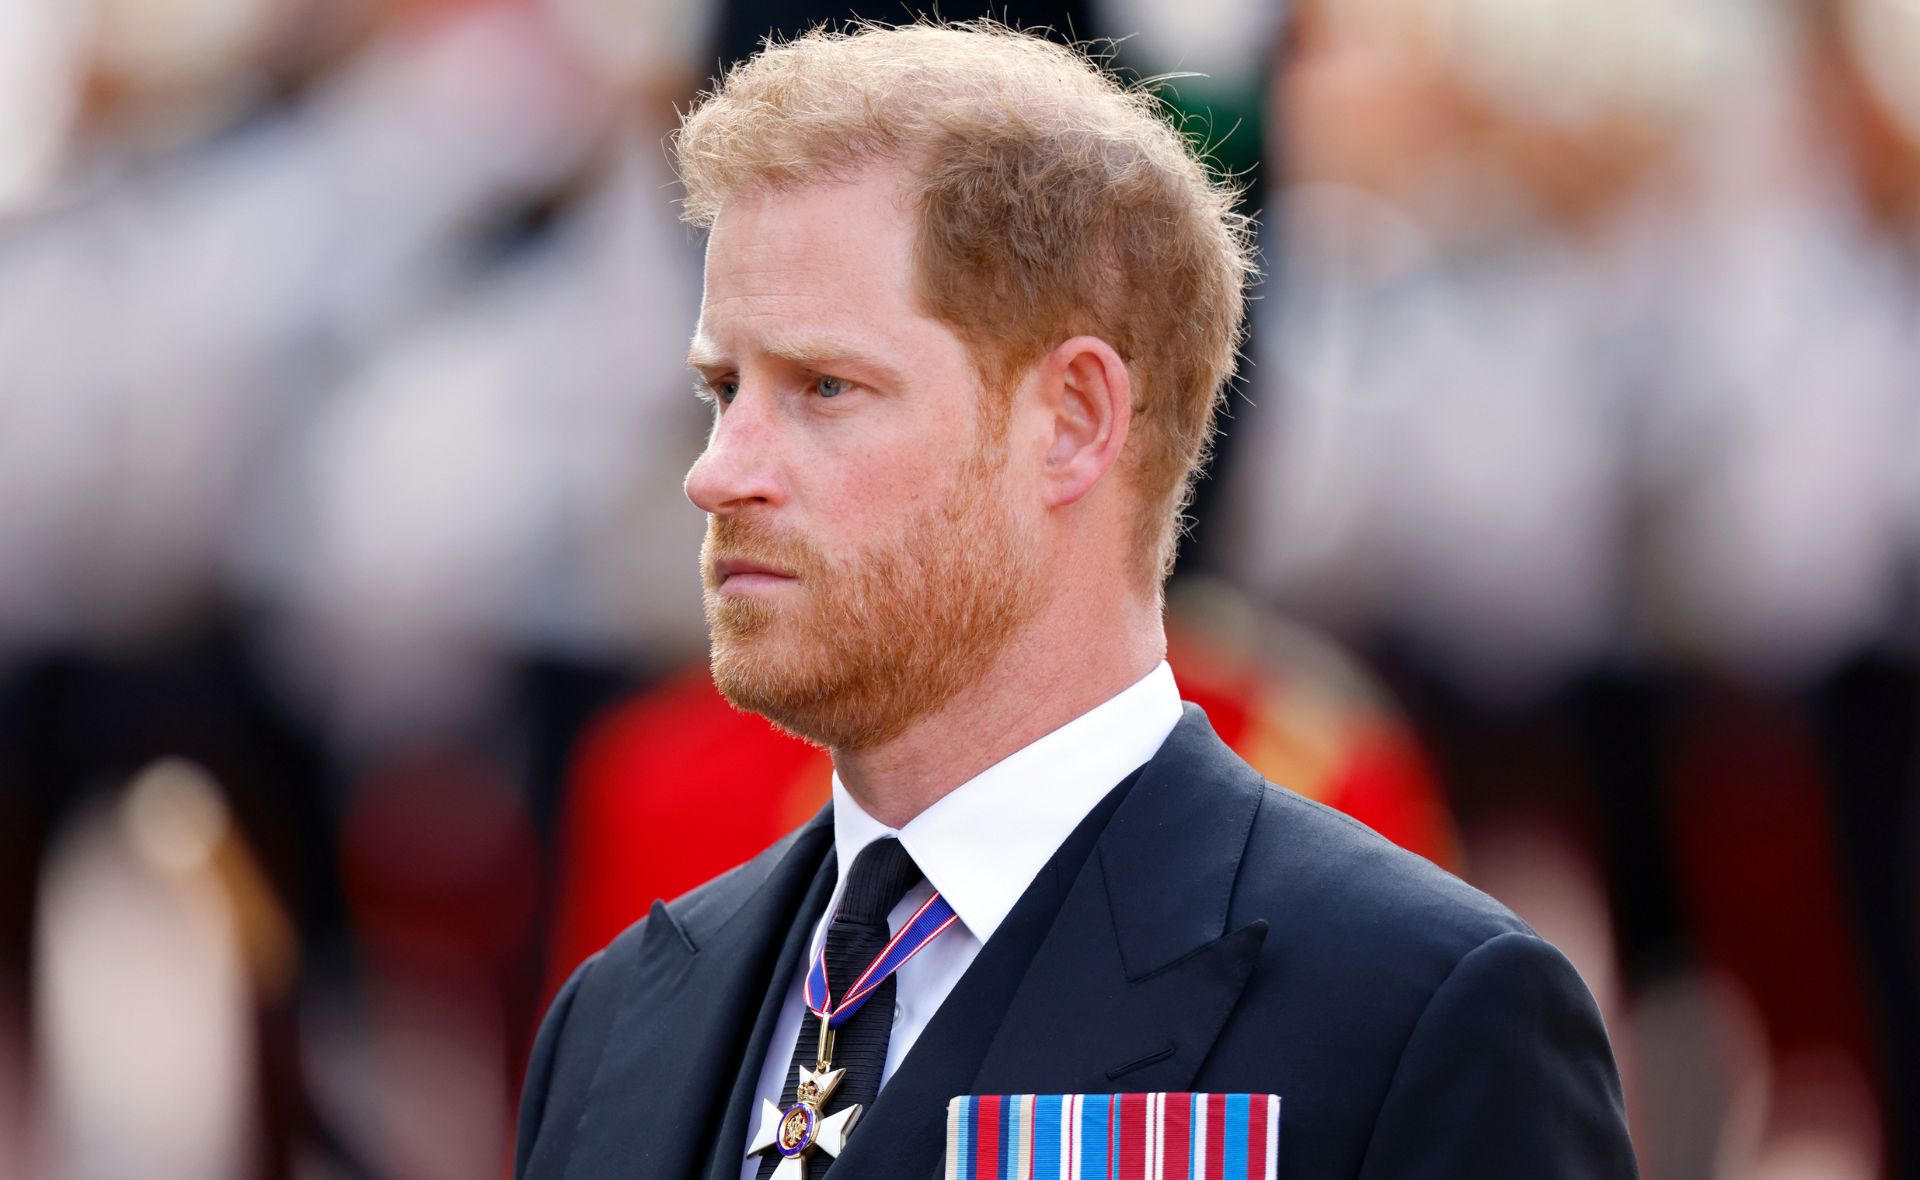 Prince Harry regrets missing Queen Elizabeth’s passing as he chose to reside further away